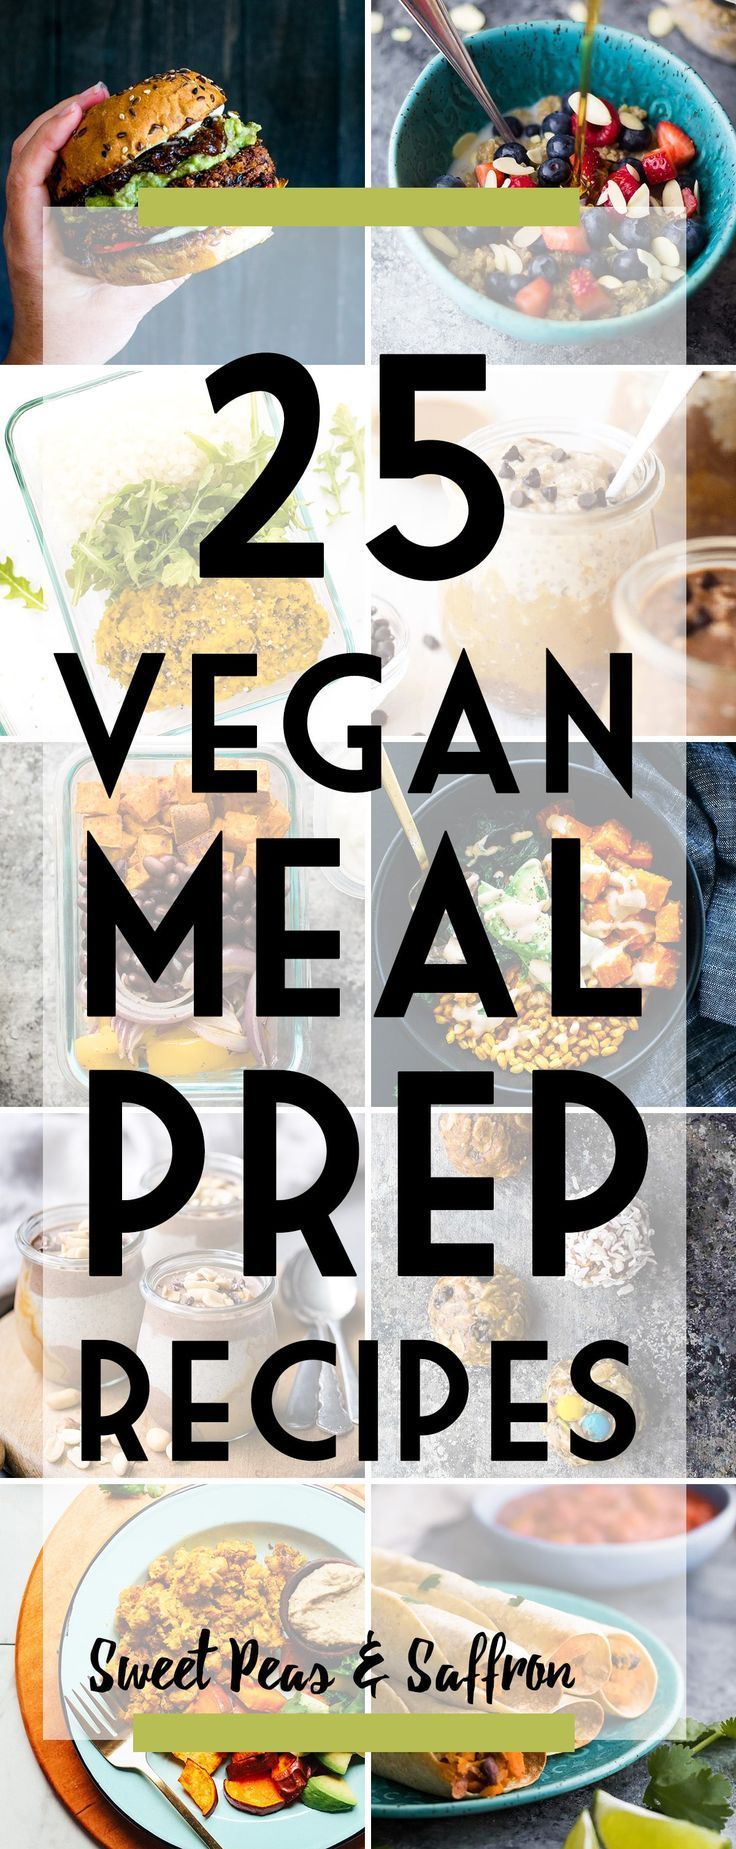 Vegan meal prep recipes: these make ahead vegan recipe ideas will have you covered for breakfast, lunch, dinner and snack!